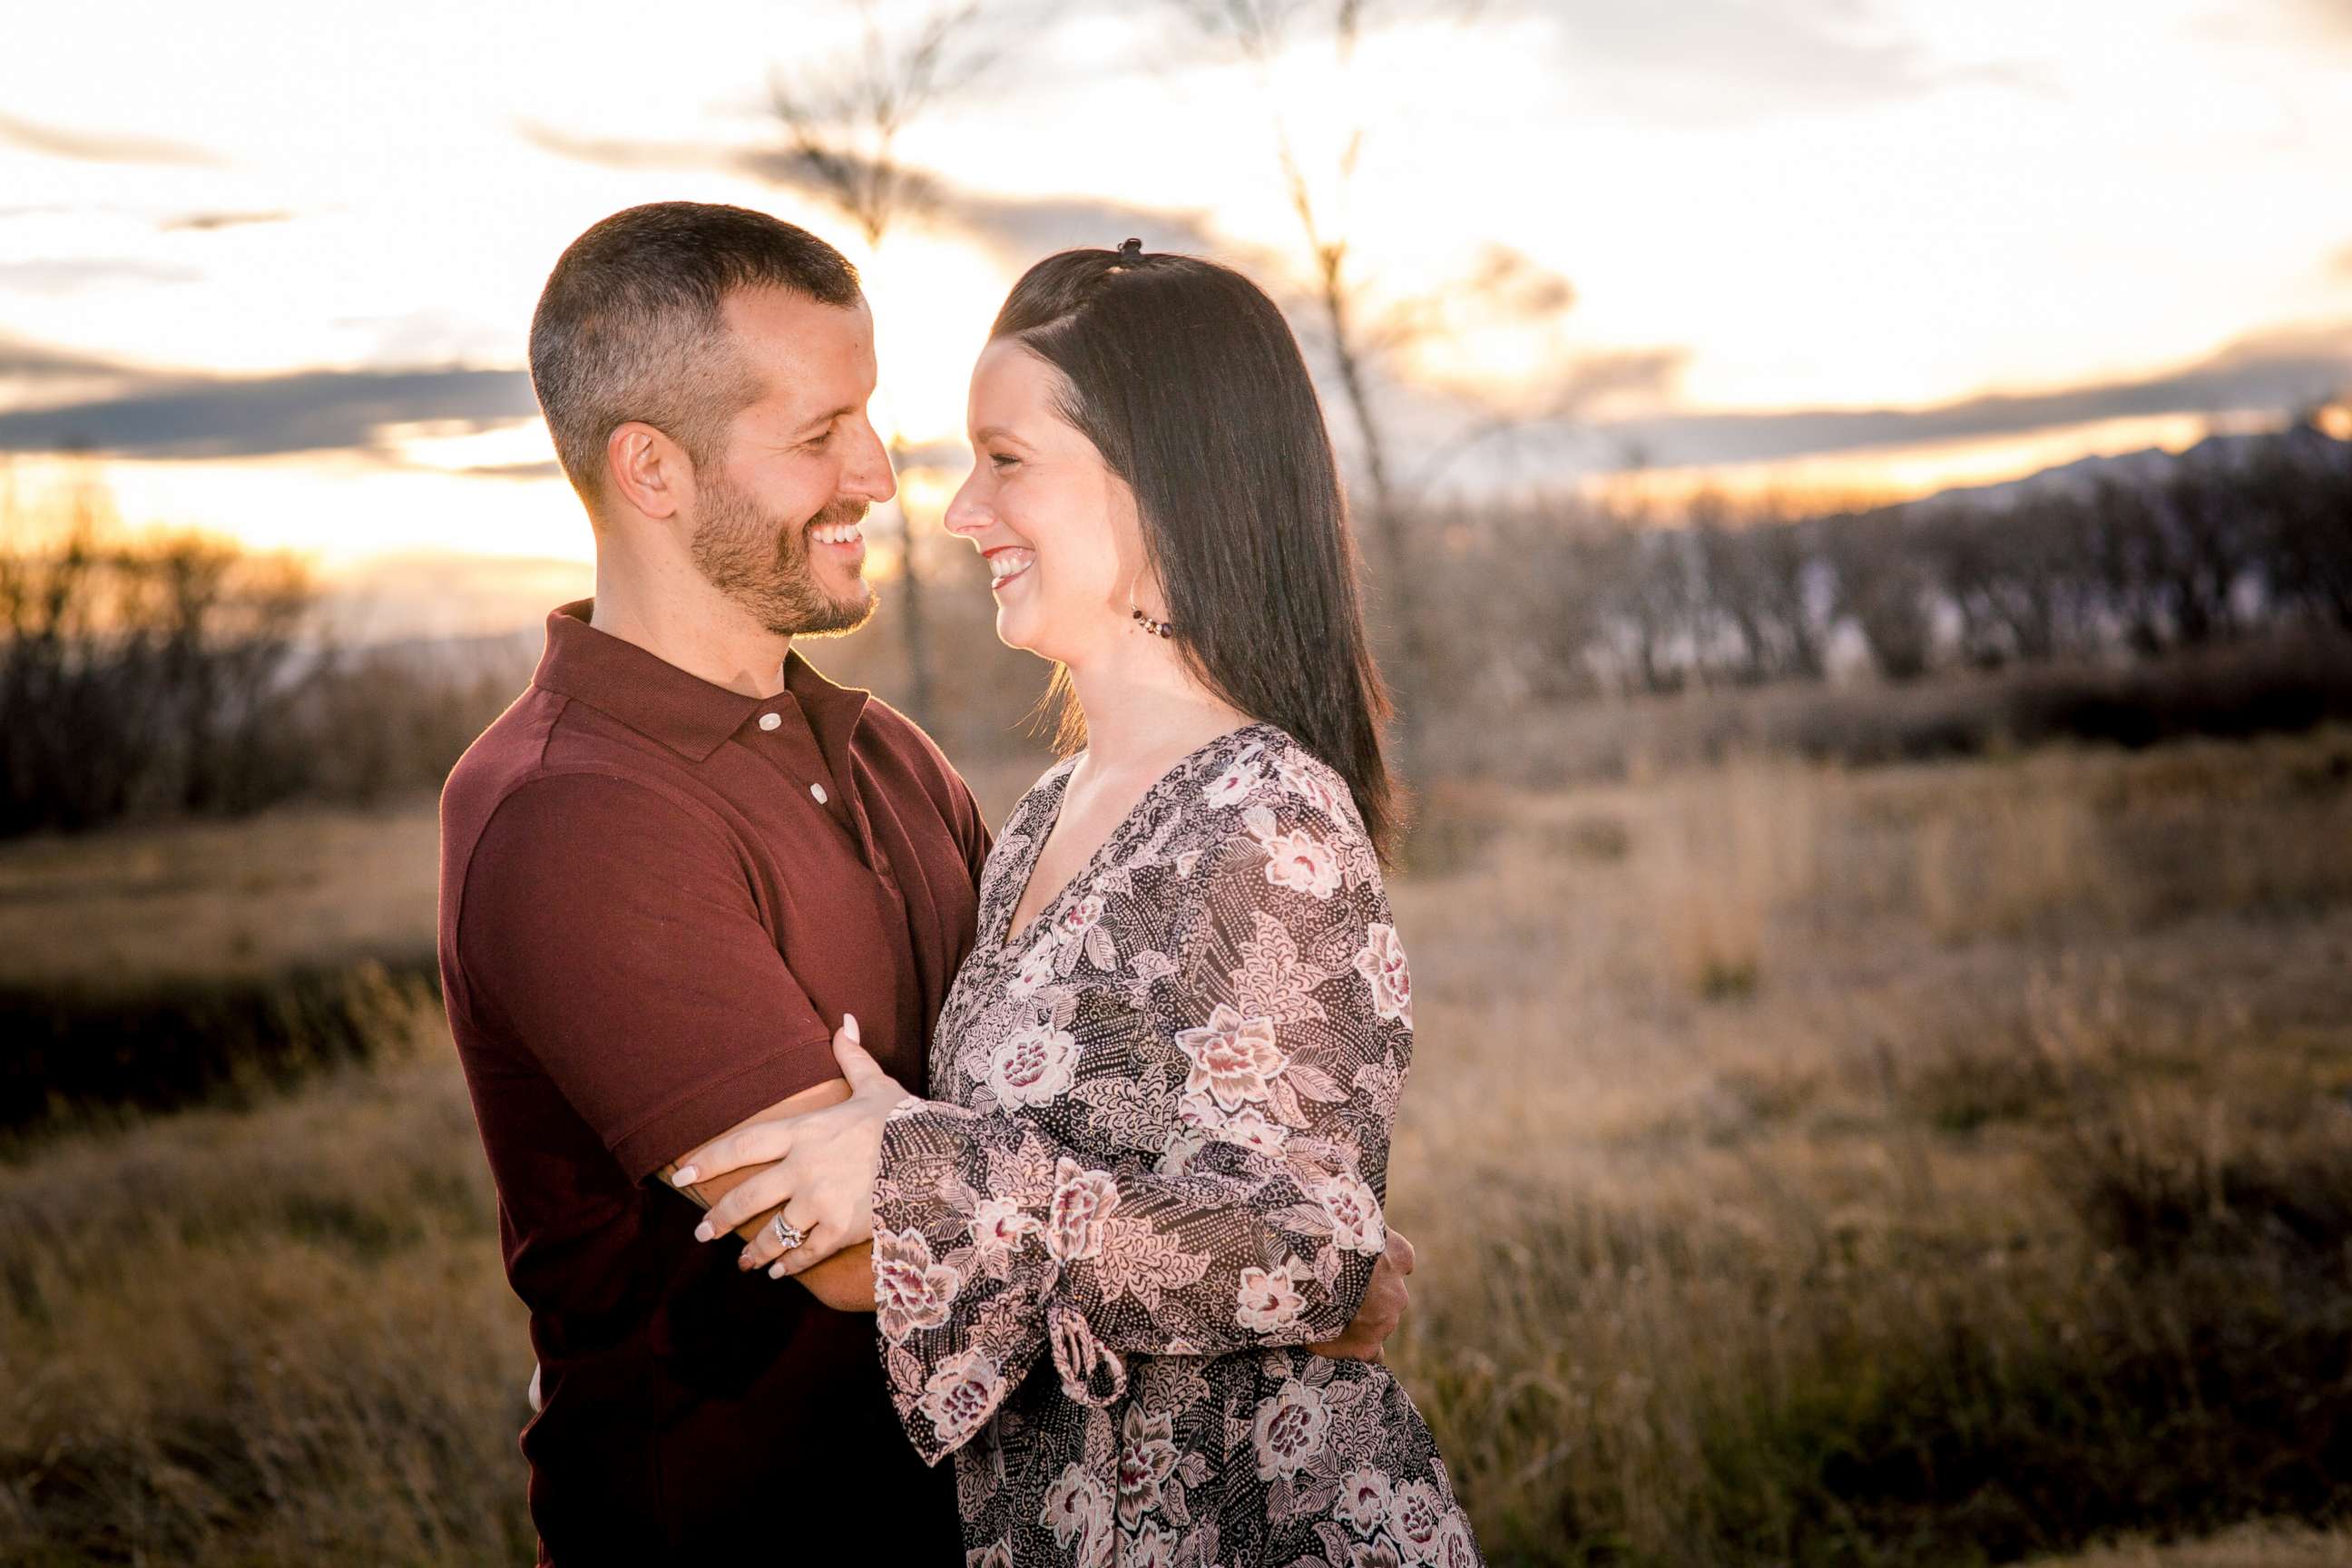 PHOTO: Chris Watts with his wife Shanann. He was sentenced to life without parole in November for her murder, and the murder of his two daughters.